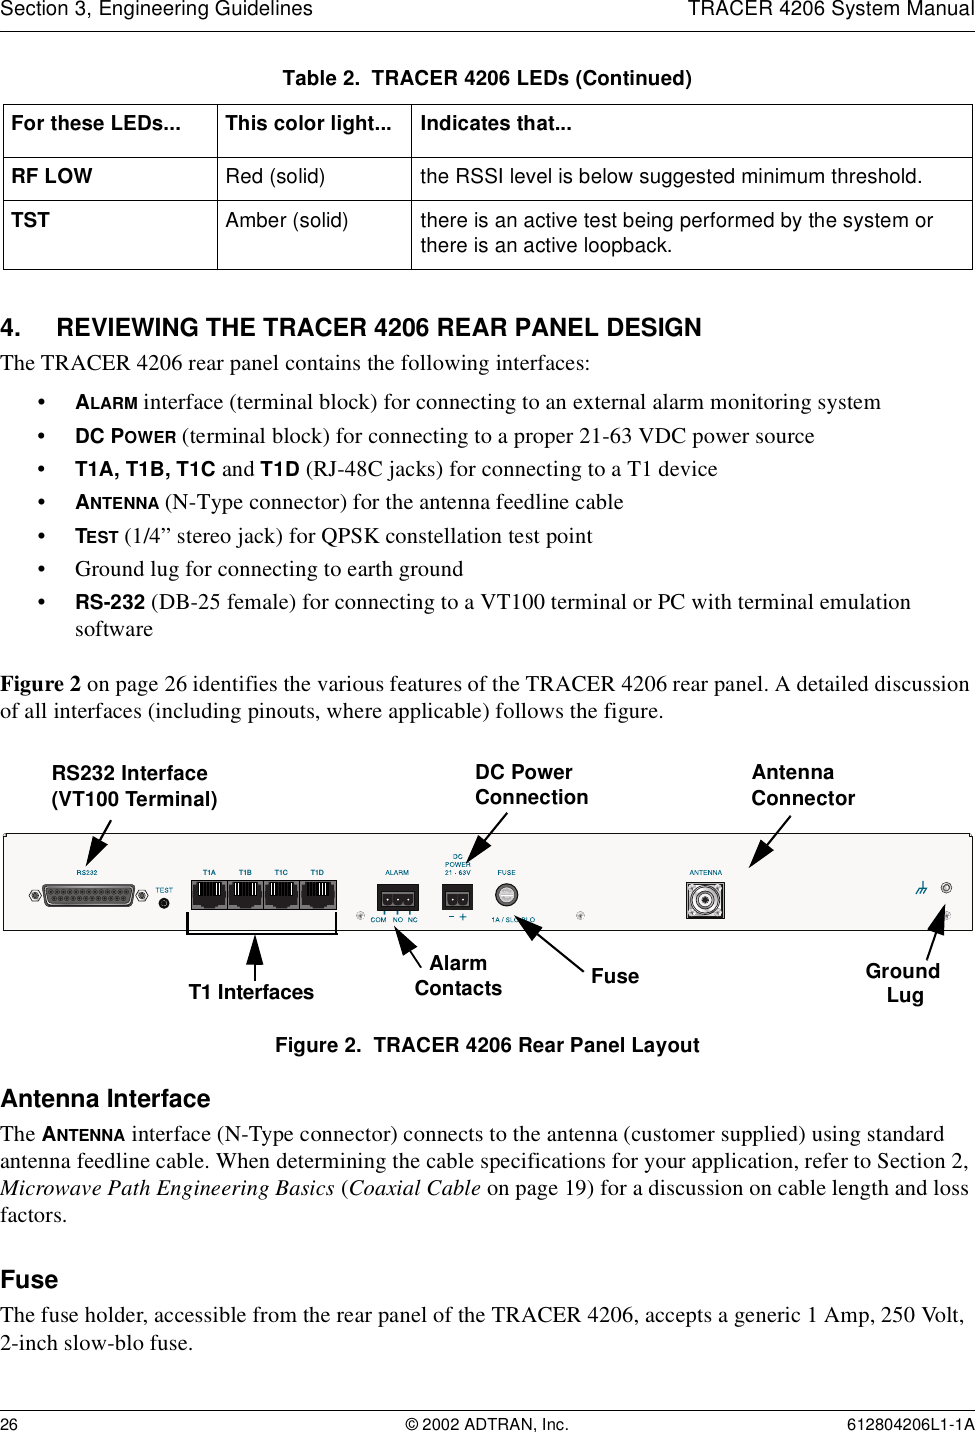 Section 3, Engineering Guidelines TRACER 4206 System Manual26 © 2002 ADTRAN, Inc. 612804206L1-1A4. REVIEWING THE TRACER 4206 REAR PANEL DESIGNThe TRACER 4206 rear panel contains the following interfaces:•ALARM interface (terminal block) for connecting to an external alarm monitoring system•DC POWER (terminal block) for connecting to a proper 21-63 VDC power source•T1A, T1B, T1C and T1D (RJ-48C jacks) for connecting to a T1 device•ANTENNA (N-Type connector) for the antenna feedline cable•TEST (1/4” stereo jack) for QPSK constellation test point• Ground lug for connecting to earth ground•RS-232 (DB-25 female) for connecting to a VT100 terminal or PC with terminal emulation softwareFigure 2 on page 26 identifies the various features of the TRACER 4206 rear panel. A detailed discussion of all interfaces (including pinouts, where applicable) follows the figure.Figure 2.  TRACER 4206 Rear Panel LayoutAntenna InterfaceThe ANTENNA interface (N-Type connector) connects to the antenna (customer supplied) using standard antenna feedline cable. When determining the cable specifications for your application, refer to Section 2, Microwave Path Engineering Basics (Coaxial Cable on page 19) for a discussion on cable length and loss factors.FuseThe fuse holder, accessible from the rear panel of the TRACER 4206, accepts a generic 1 Amp, 250 Volt, 2-inch slow-blo fuse.RF LOW Red (solid) the RSSI level is below suggested minimum threshold.TST Amber (solid) there is an active test being performed by the system or there is an active loopback.Table 2.  TRACER 4206 LEDs (Continued)For these LEDs... This color light... Indicates that...T1A T1B T1C T1DAntennaDC PowerConnection ConnectorT1 InterfacesRS232 Interface(VT100 Terminal)GroundLugFuseAlarmContacts